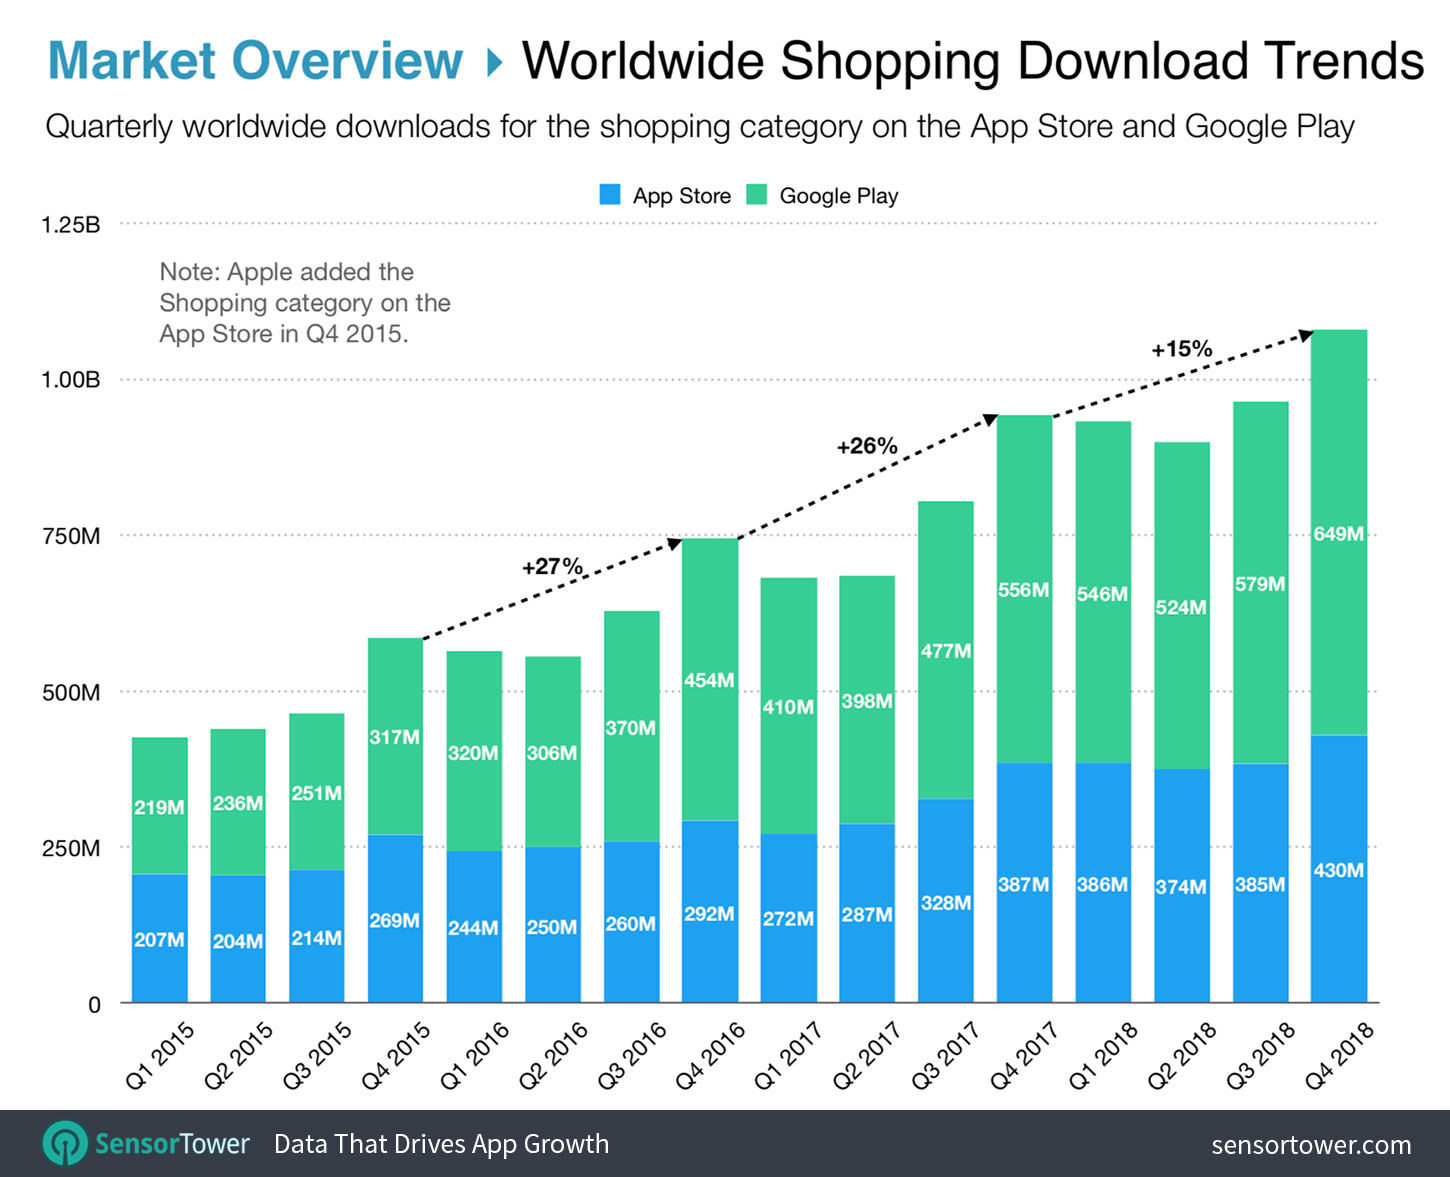 Worldwide Shopping App Download Trends from 2015-2018